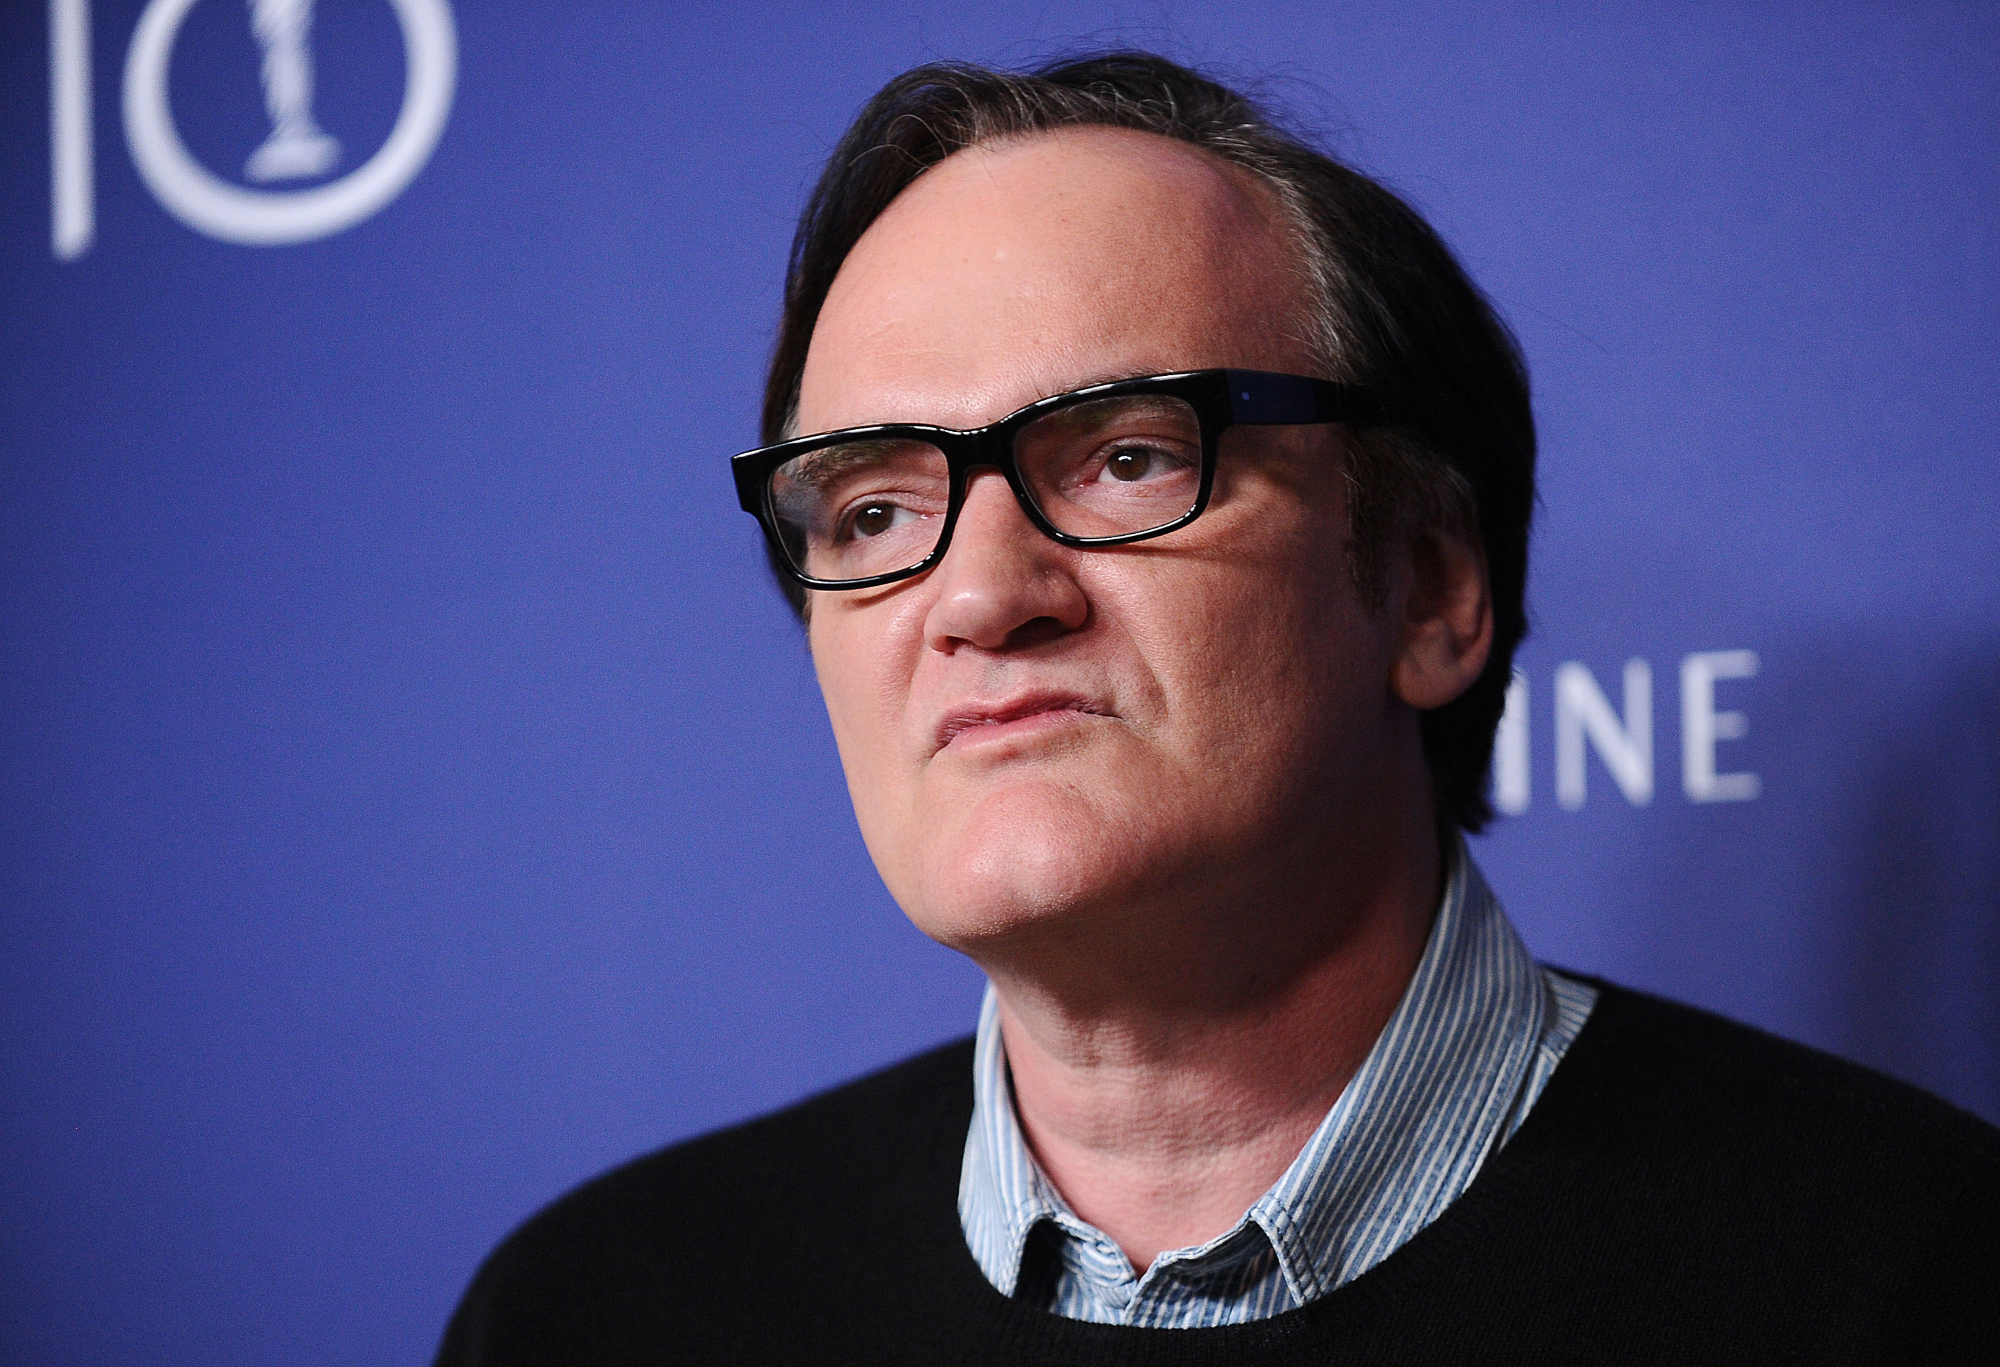 Quentin Tarantino, who collaborates with recurring actors, wearing glasses and a collared shirt in front of a blue step and repeat